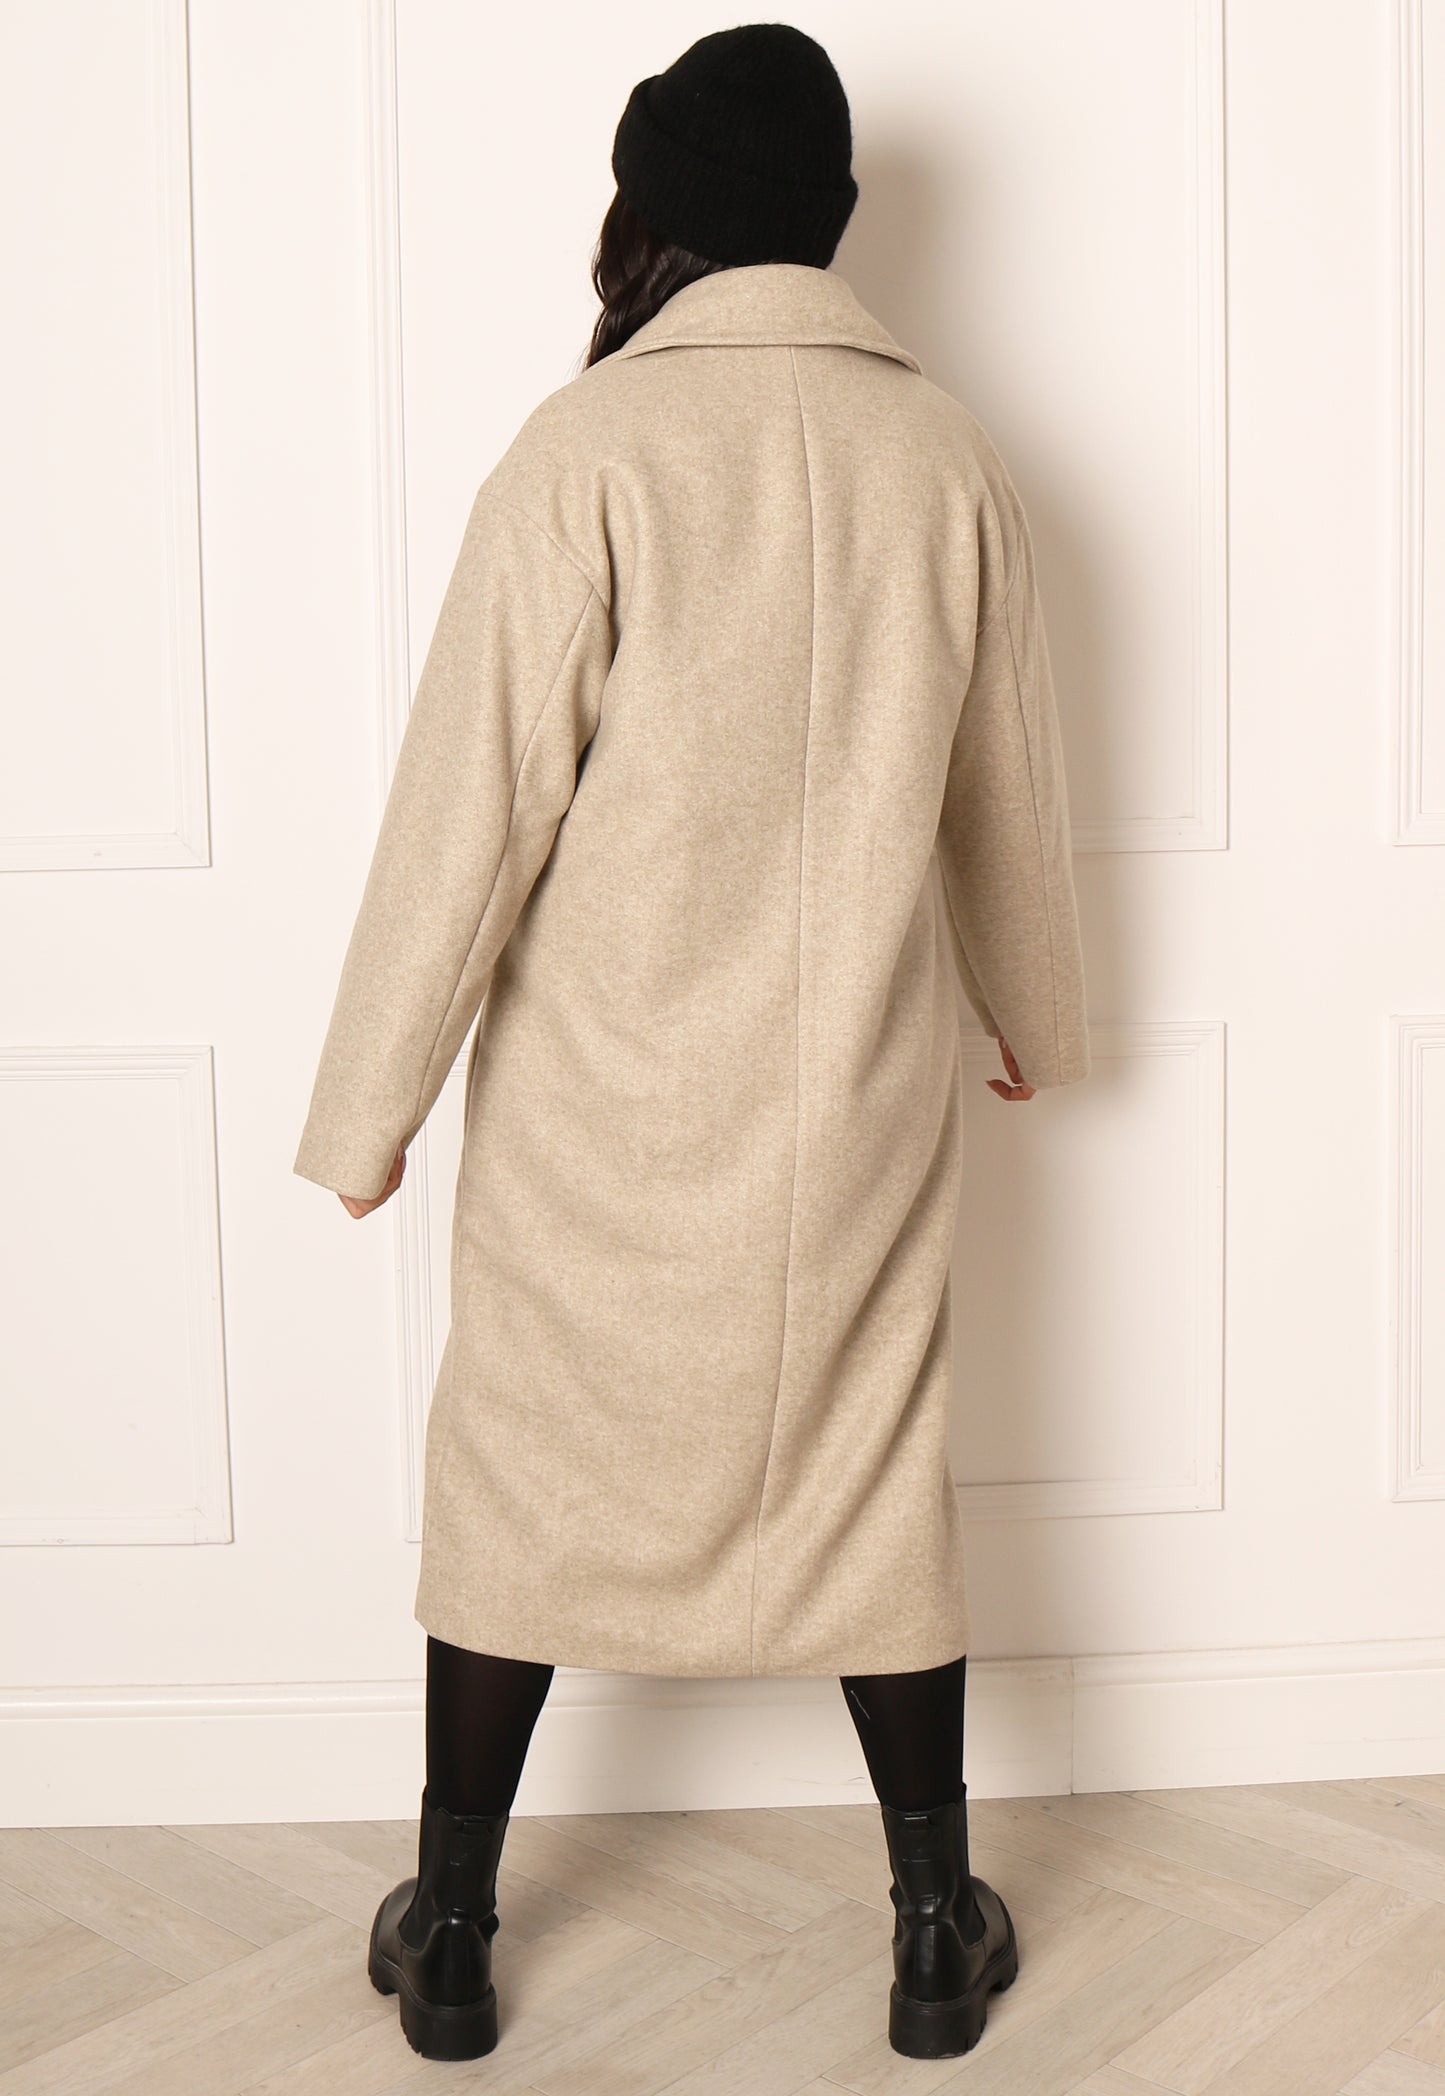 
                  
                    ONLY Wembley Oversized Double Breasted Longline Wool Style Trench Coat in Beige Melange - One Nation Clothing
                  
                